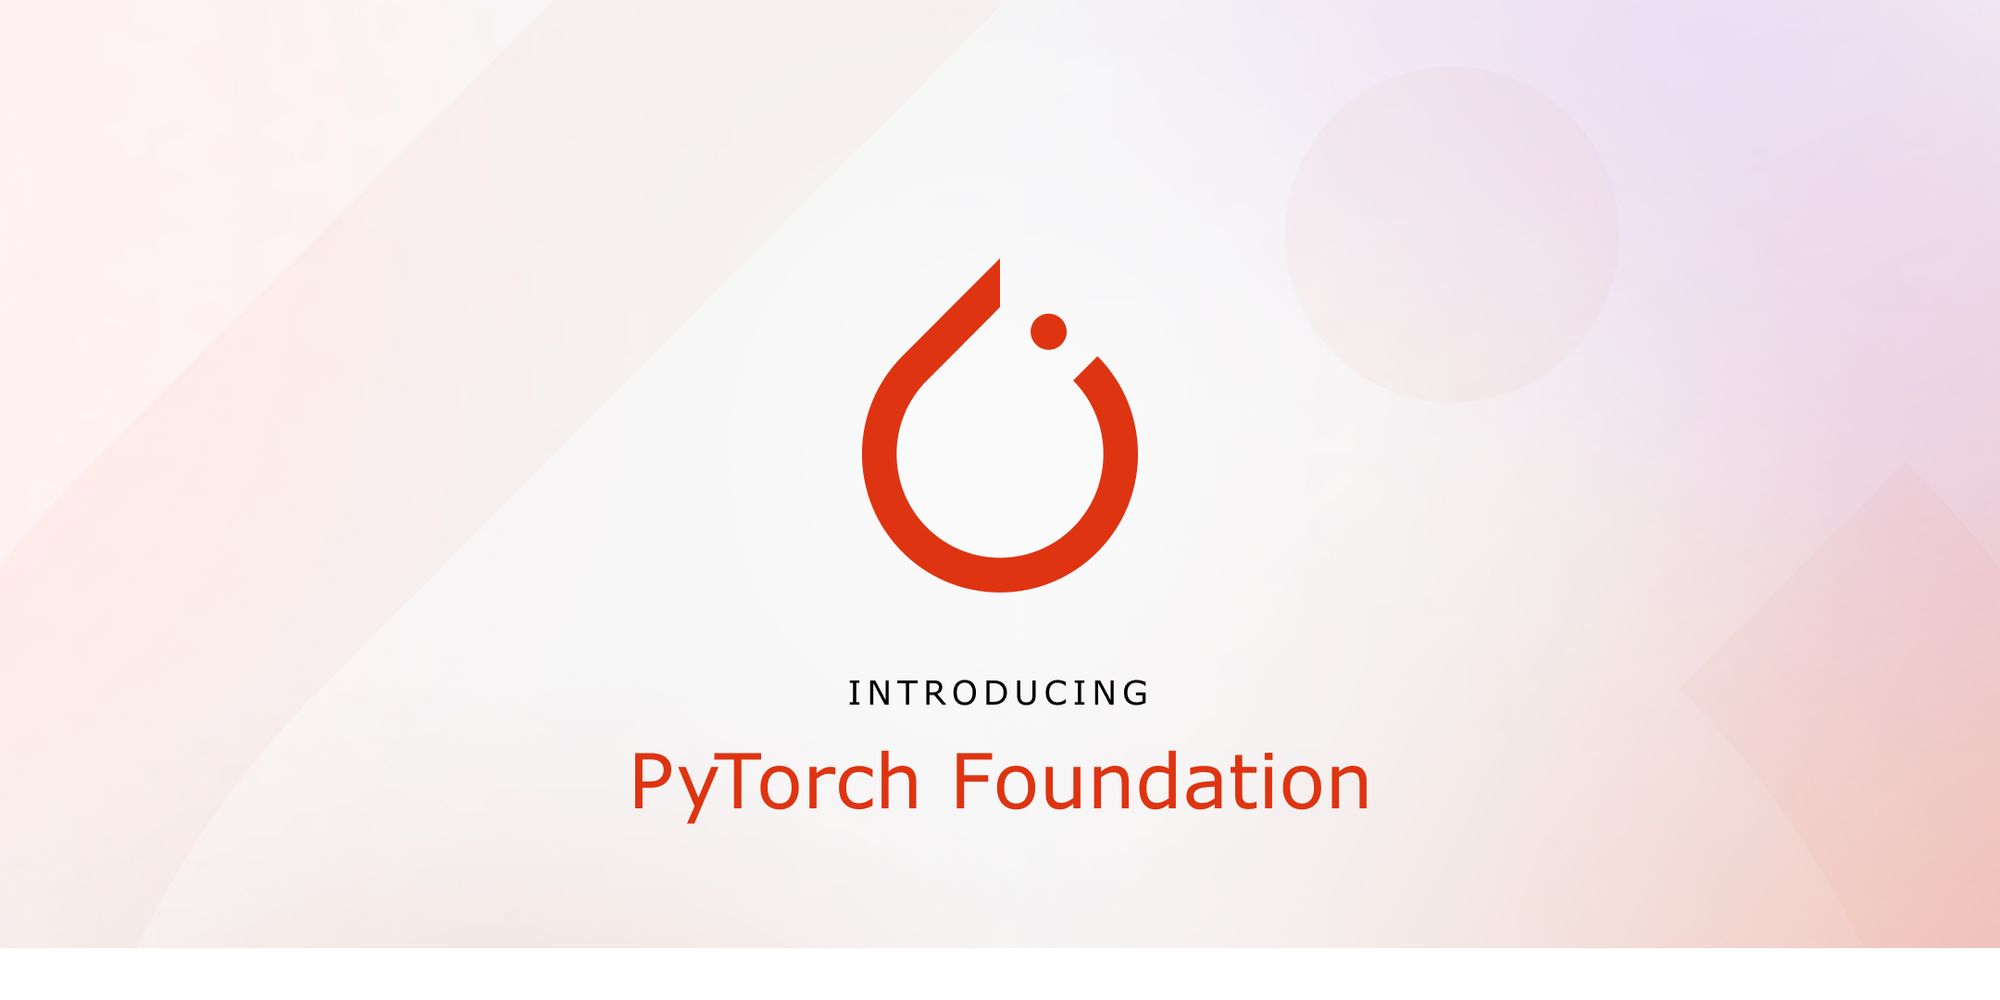 PyTorch strengthens its governance by joining the Linux Foundation